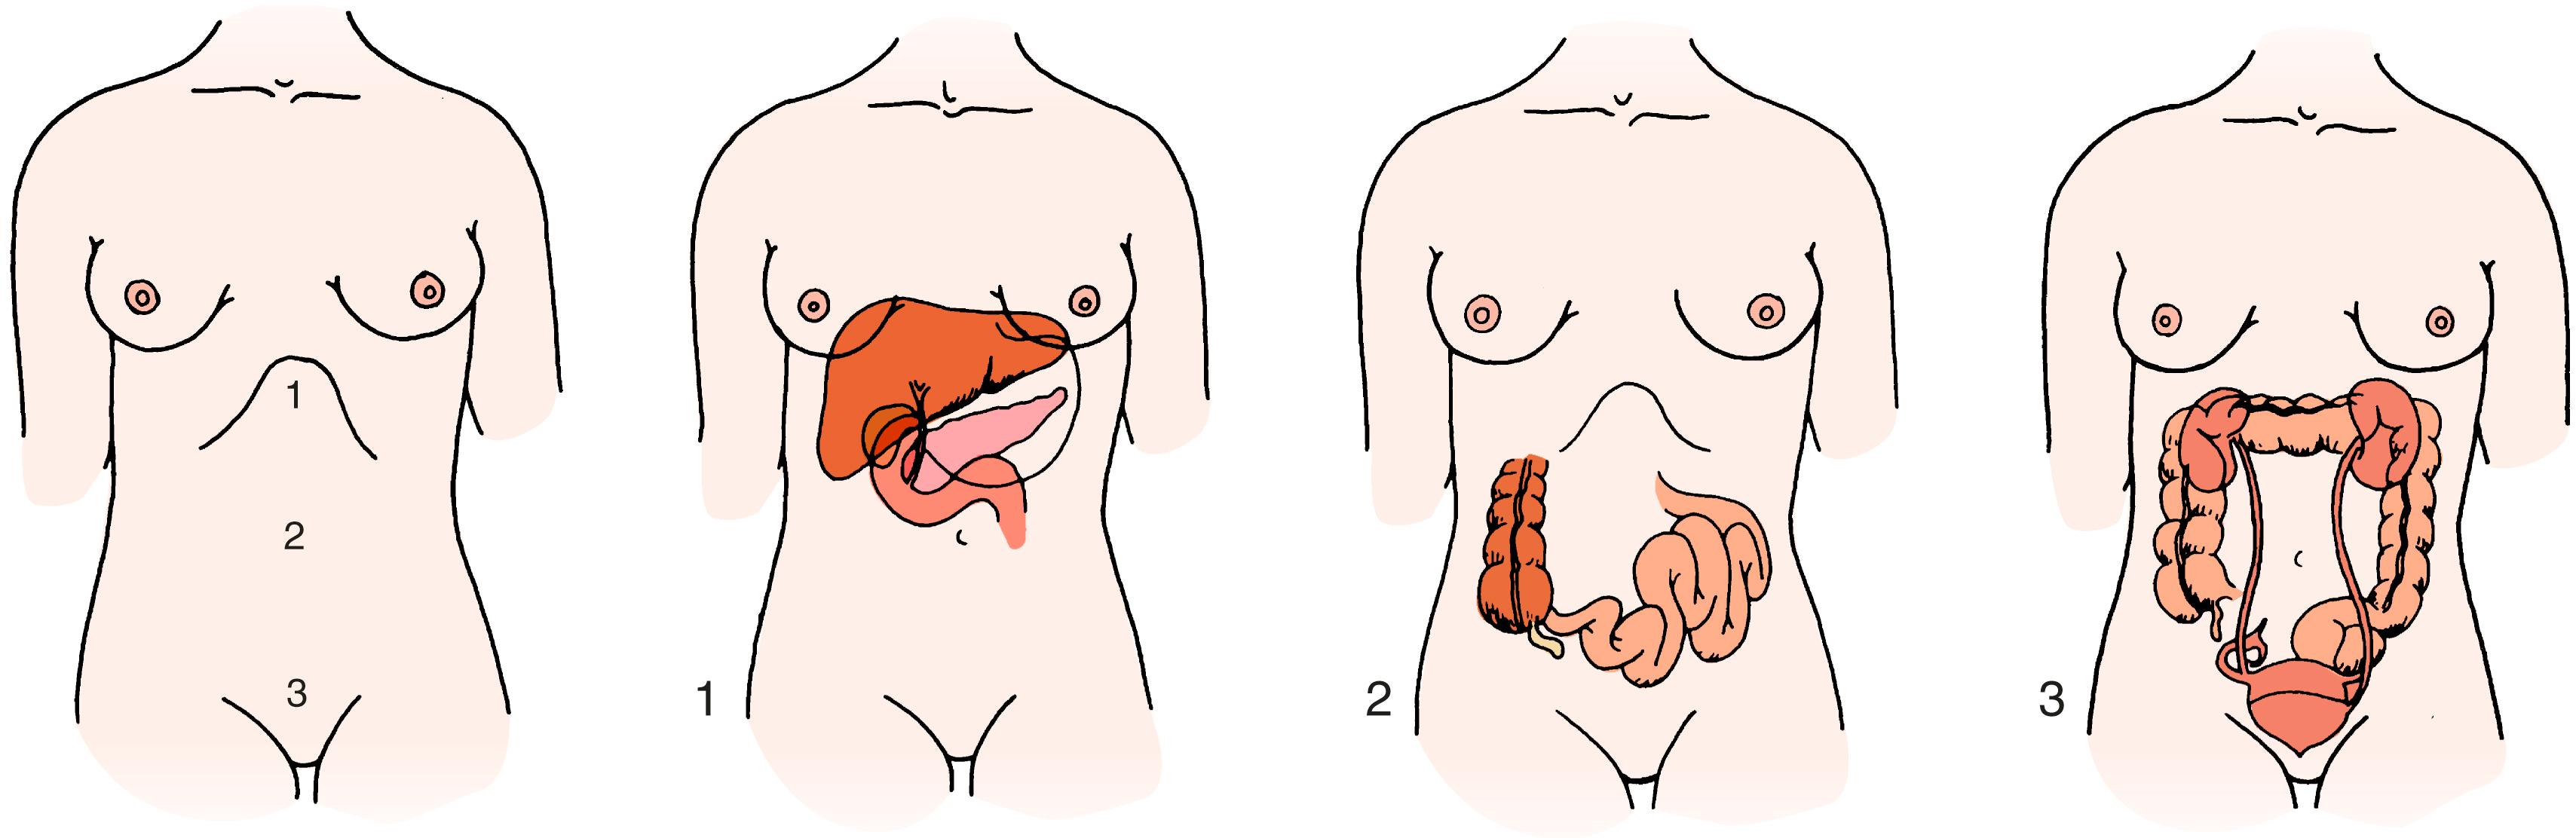 Fig. 13.1, “Visceral” abdominal pain: deep, dull, diffuse. The three general localizations of midline “visceral” abdominal pain are epigastric (1) , periumbilical (2) , and hypogastric (3) . 1, Epigastric pain usually suggests disease of the thorax, stomach, duodenum, pancreas, liver, or gallbladder. 2, Periumbilical pain usually implies disease of the small intestine, cecum, or both. 3, Hypogastric pain usually implicates the large intestine, pelvic organs, or urinary system.